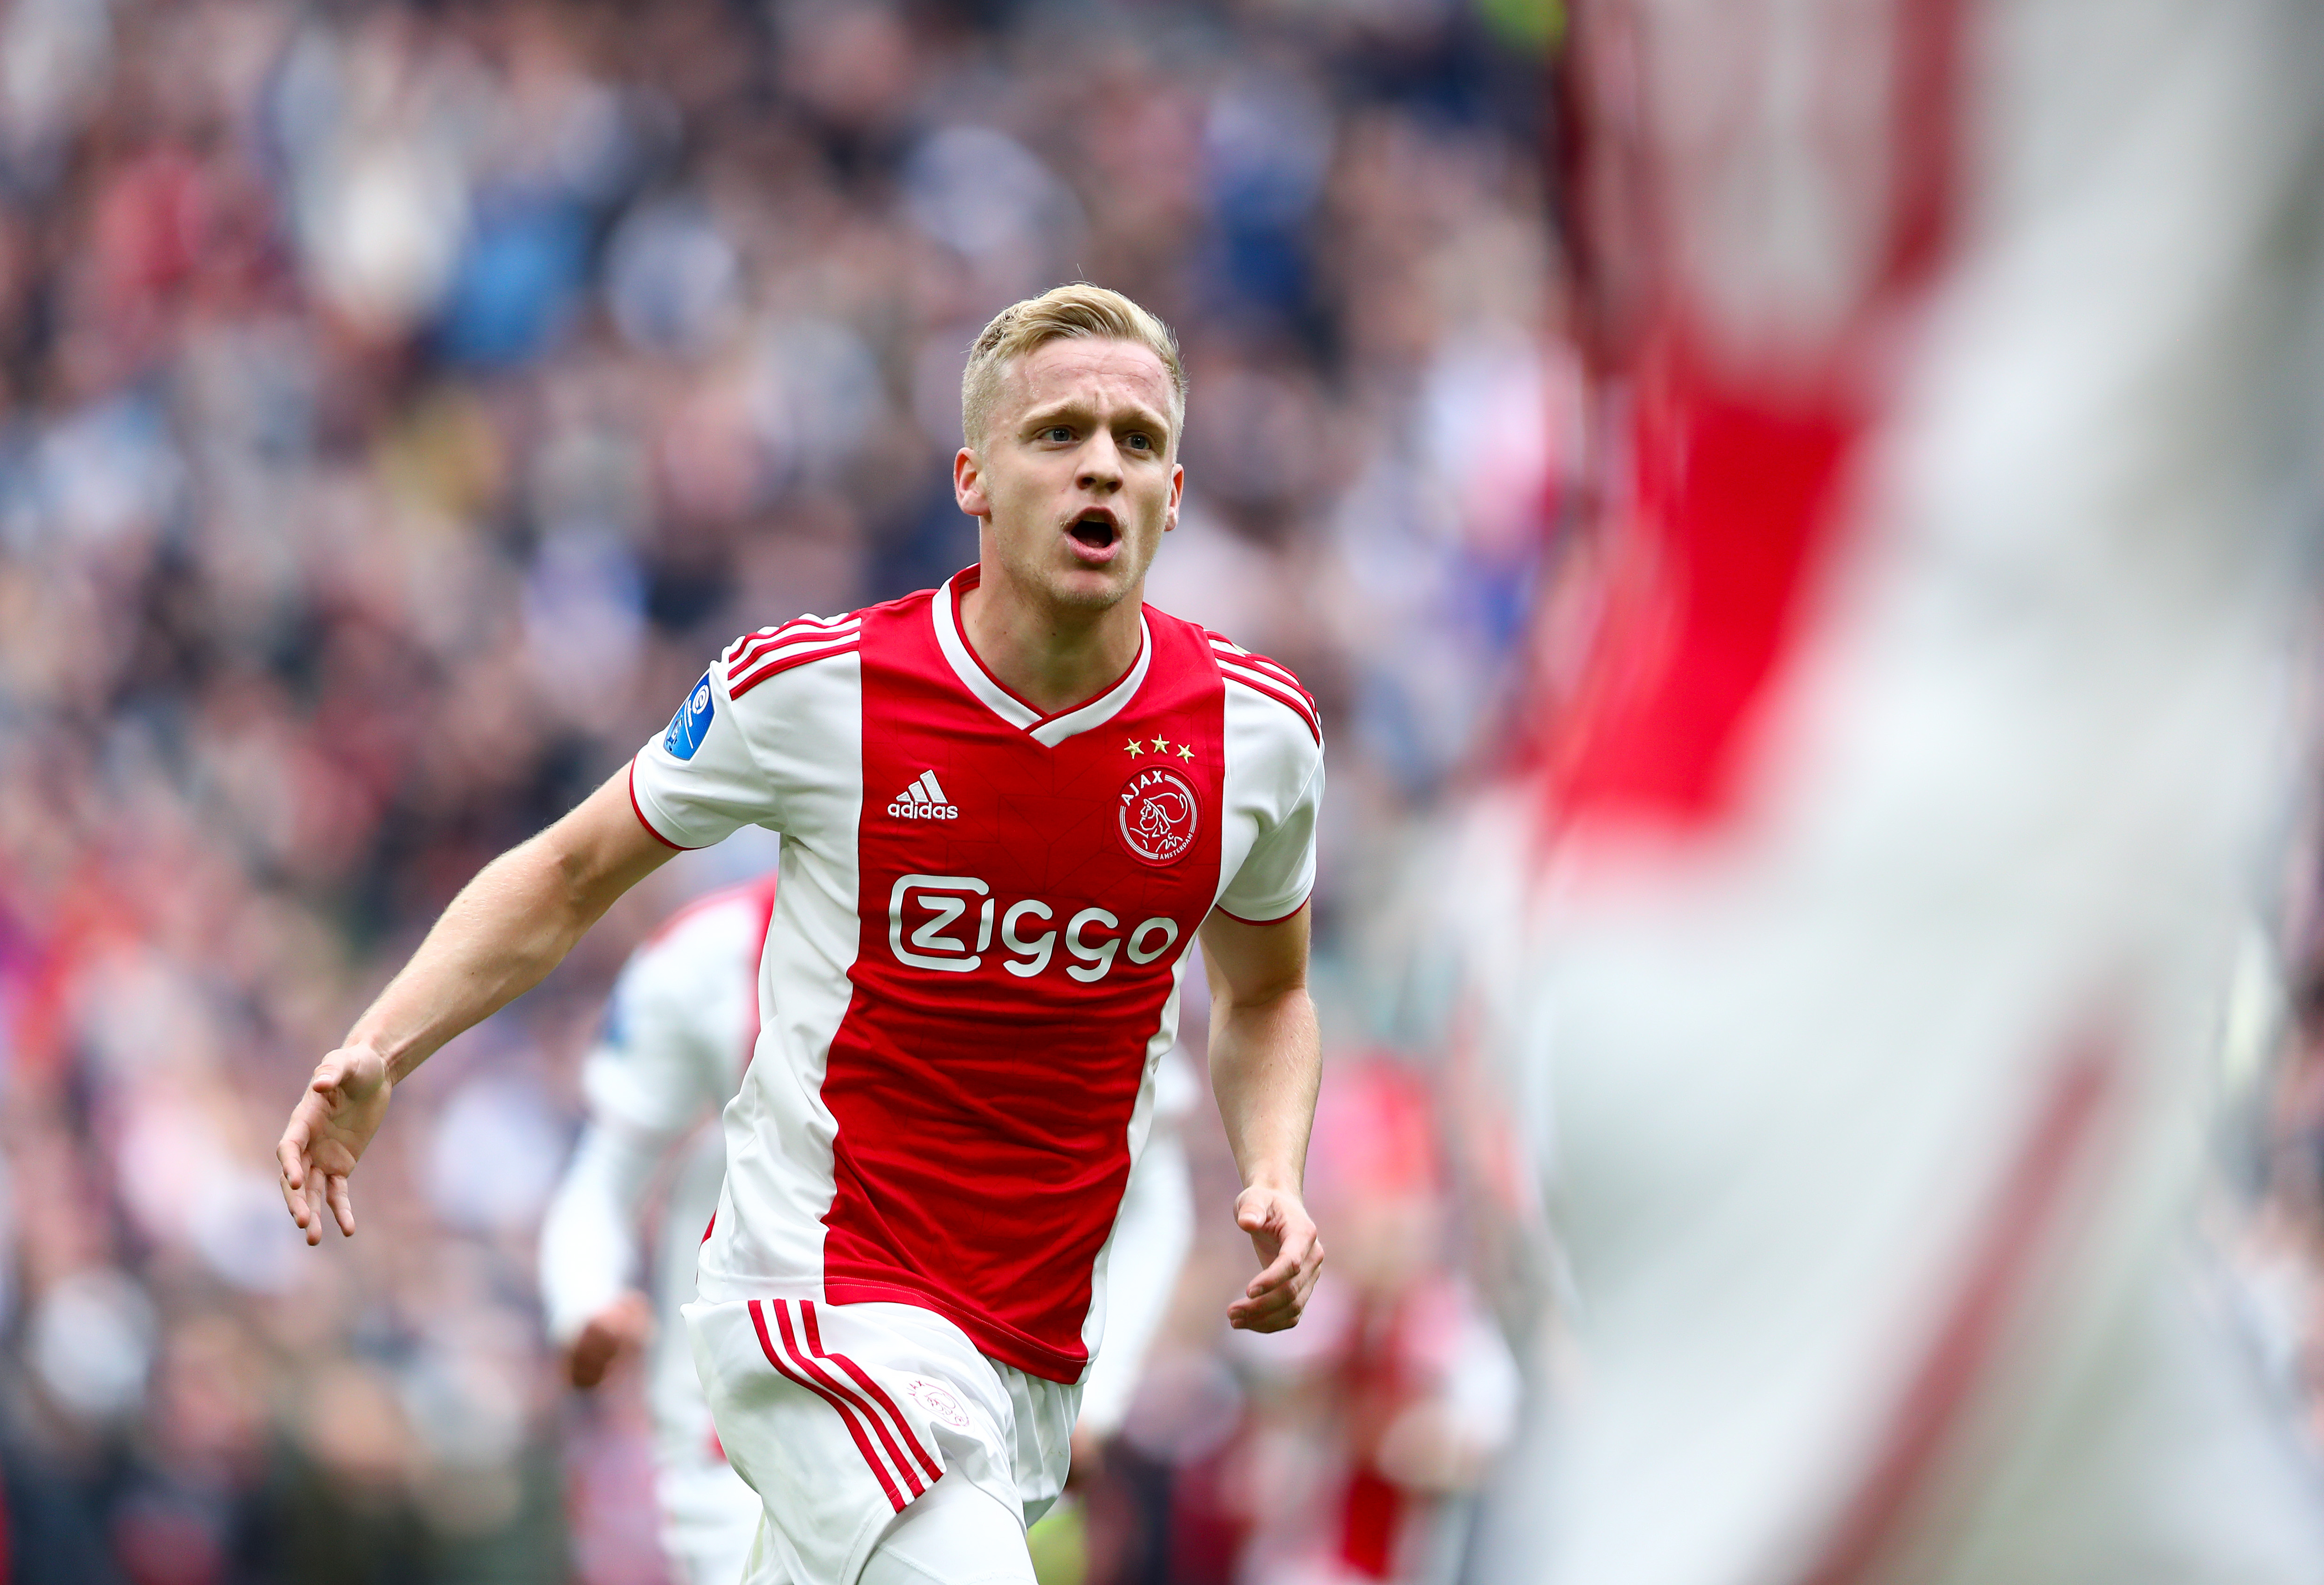 AMSTERDAM, NETHERLANDS - MAY 12: Donny Van de Beek of Ajax celebrates after scoring his team's second goal during the Eredivisie match between Ajax and Utrecht at Johan Cruyff Arena on May 12, 2019 in Amsterdam, Netherlands. (Photo by Dean Mouhtaropoulos/Getty Images)